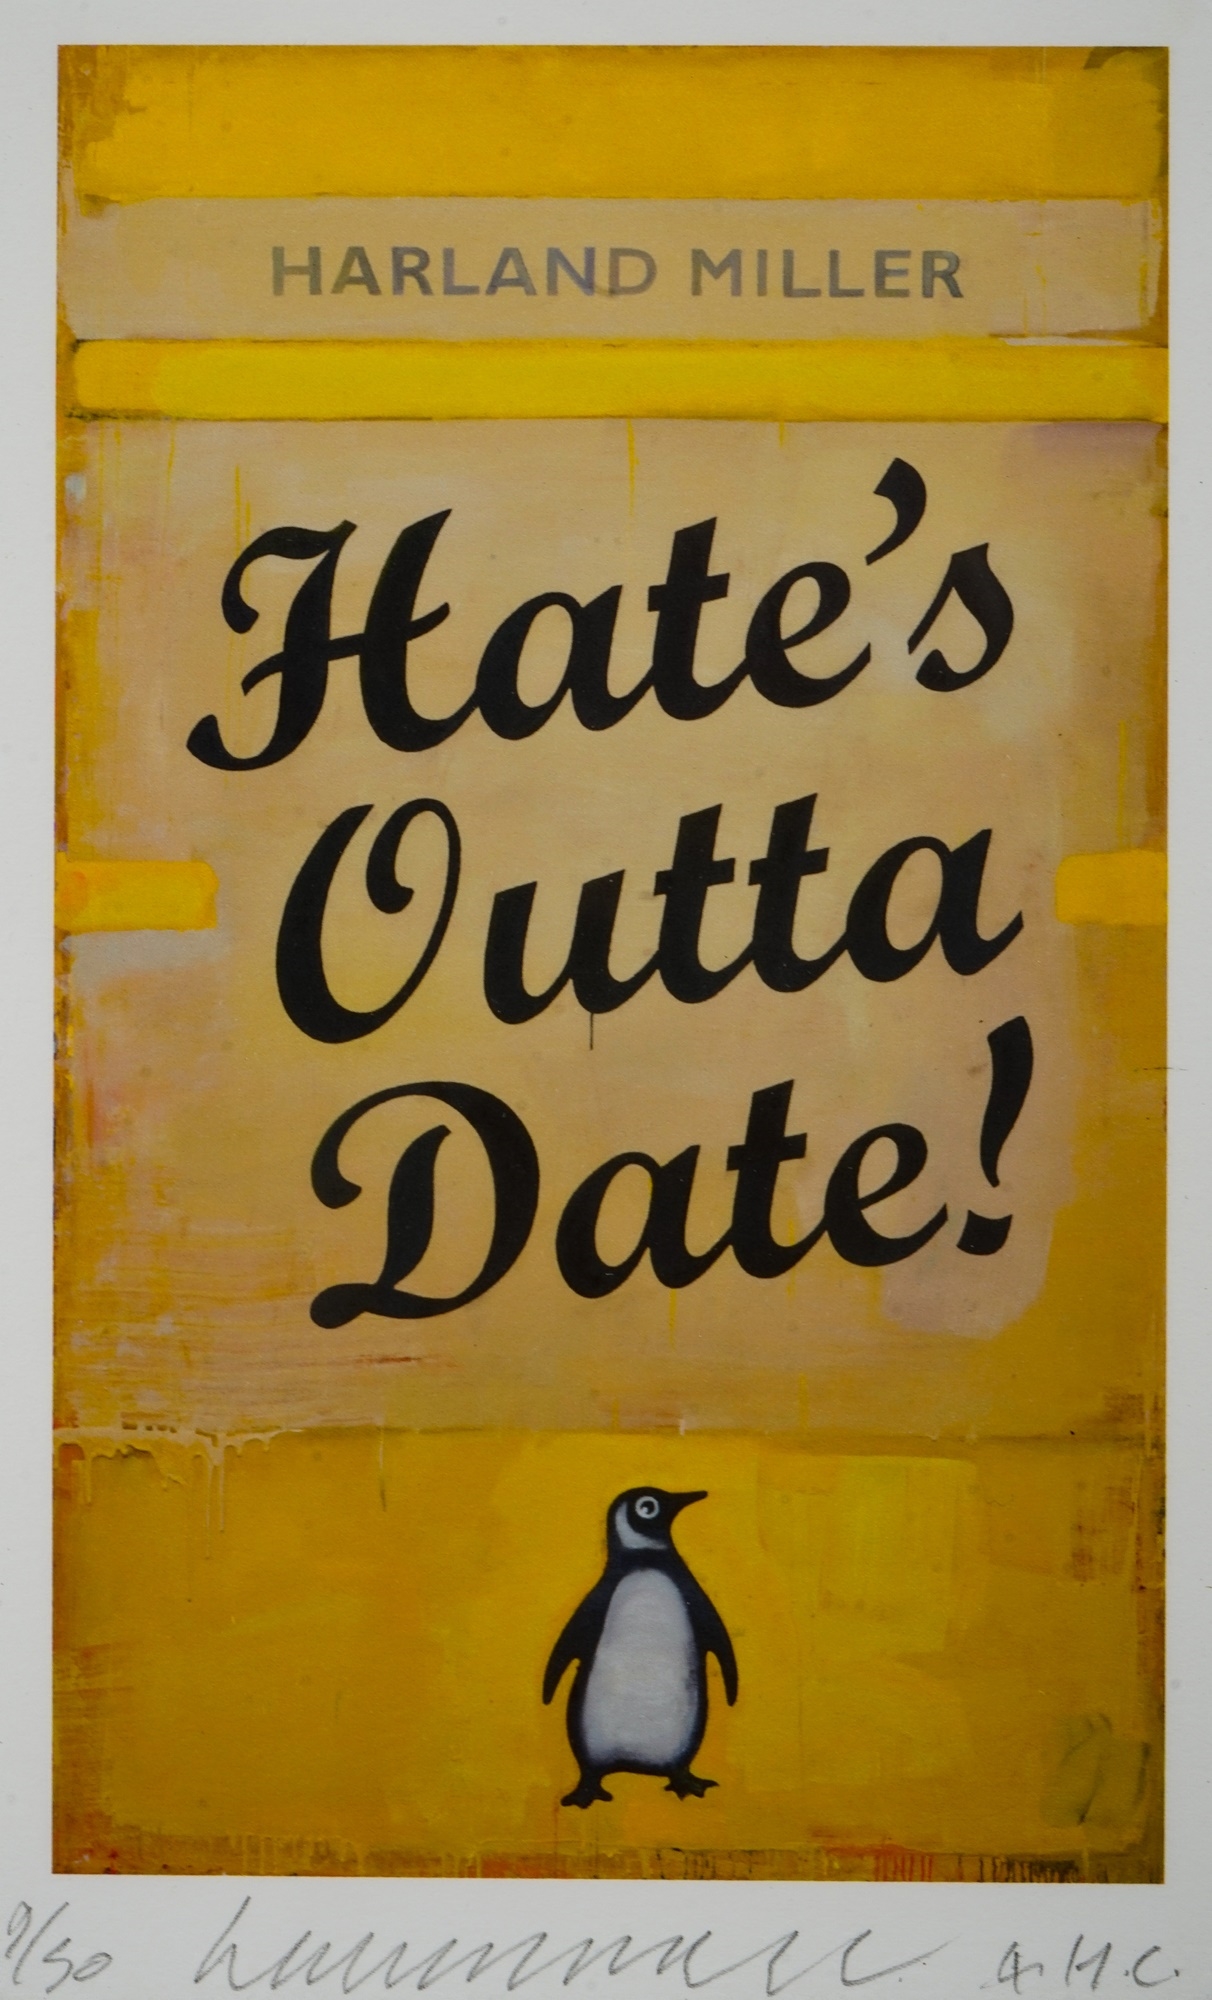 harland-miller-hate-s-outta-date-2017-mutualart